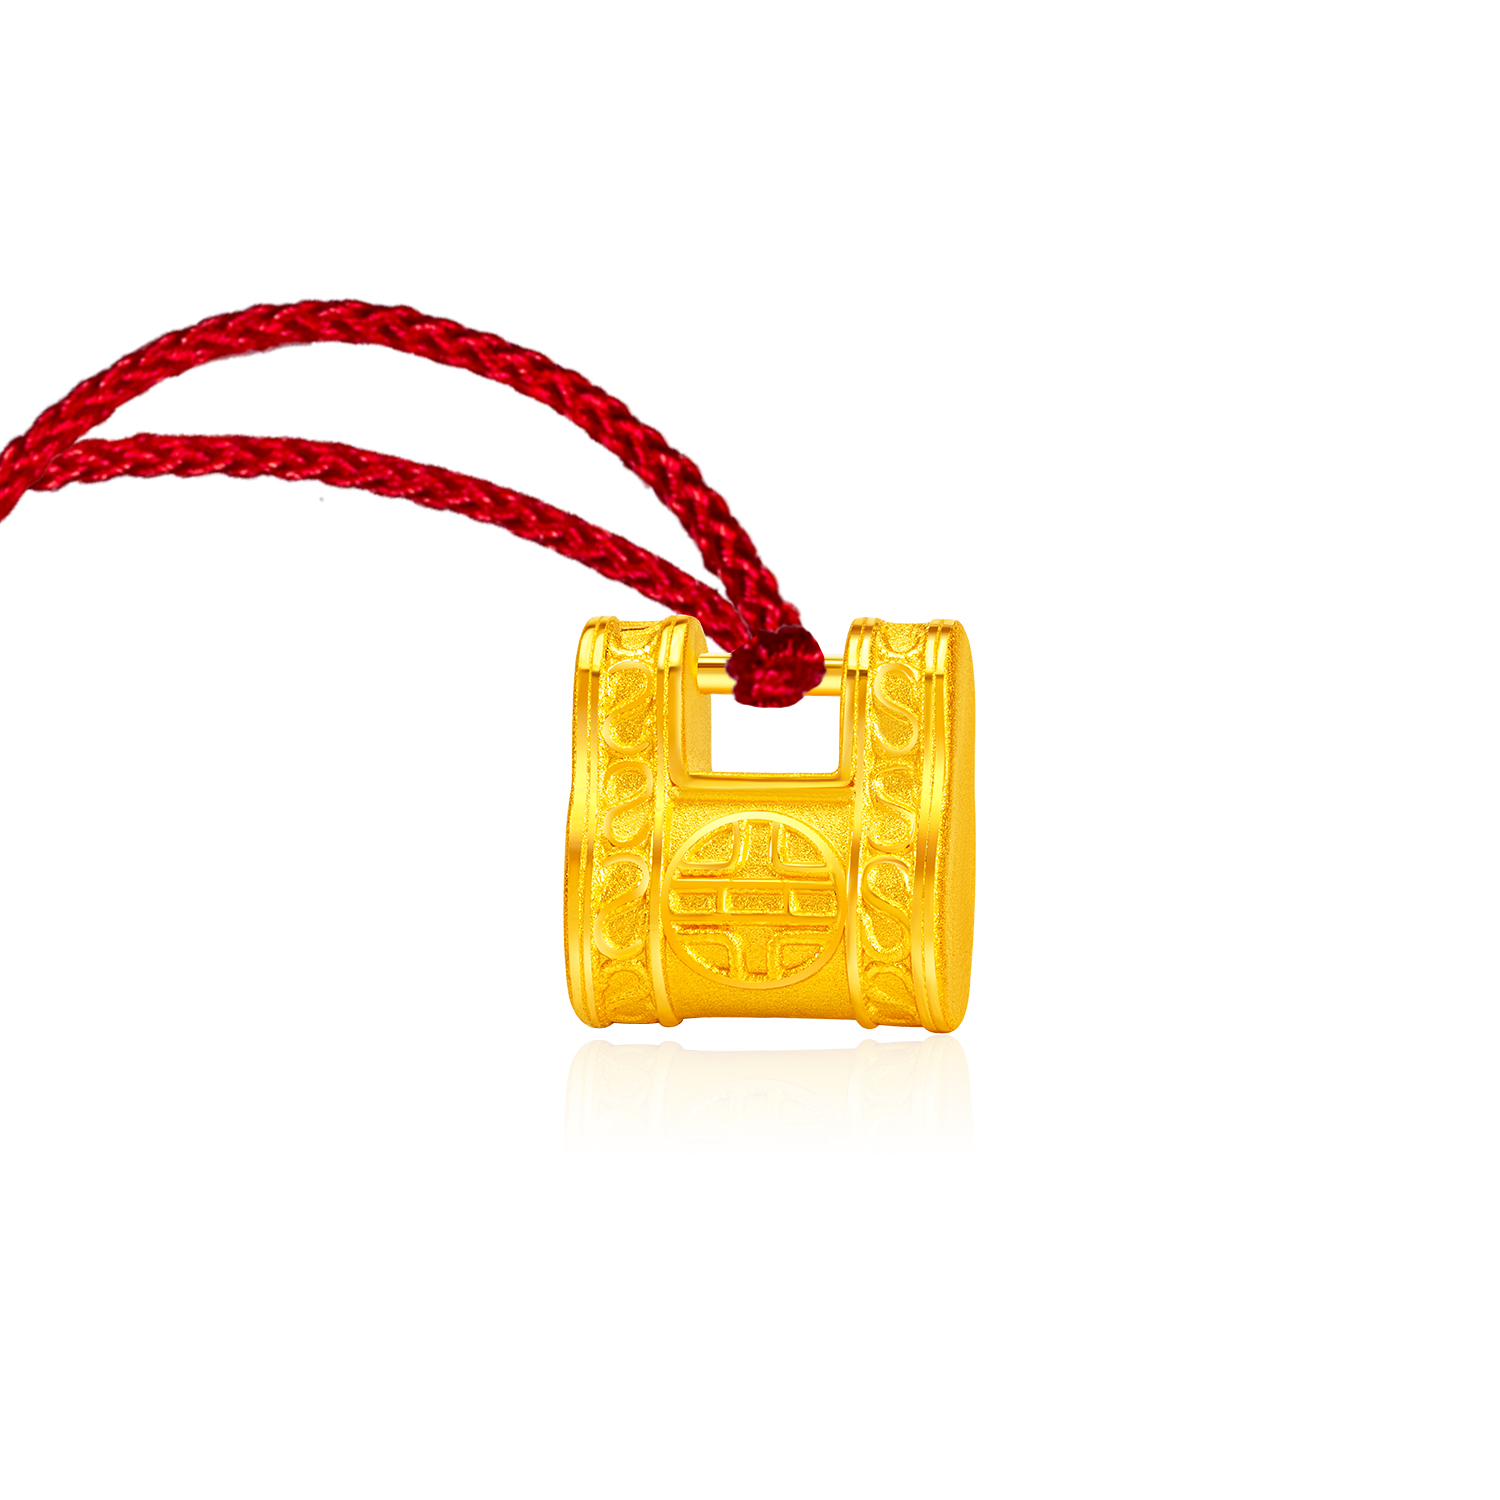 SK Jewellery Health & Protection 999 Pure Gold Pendant